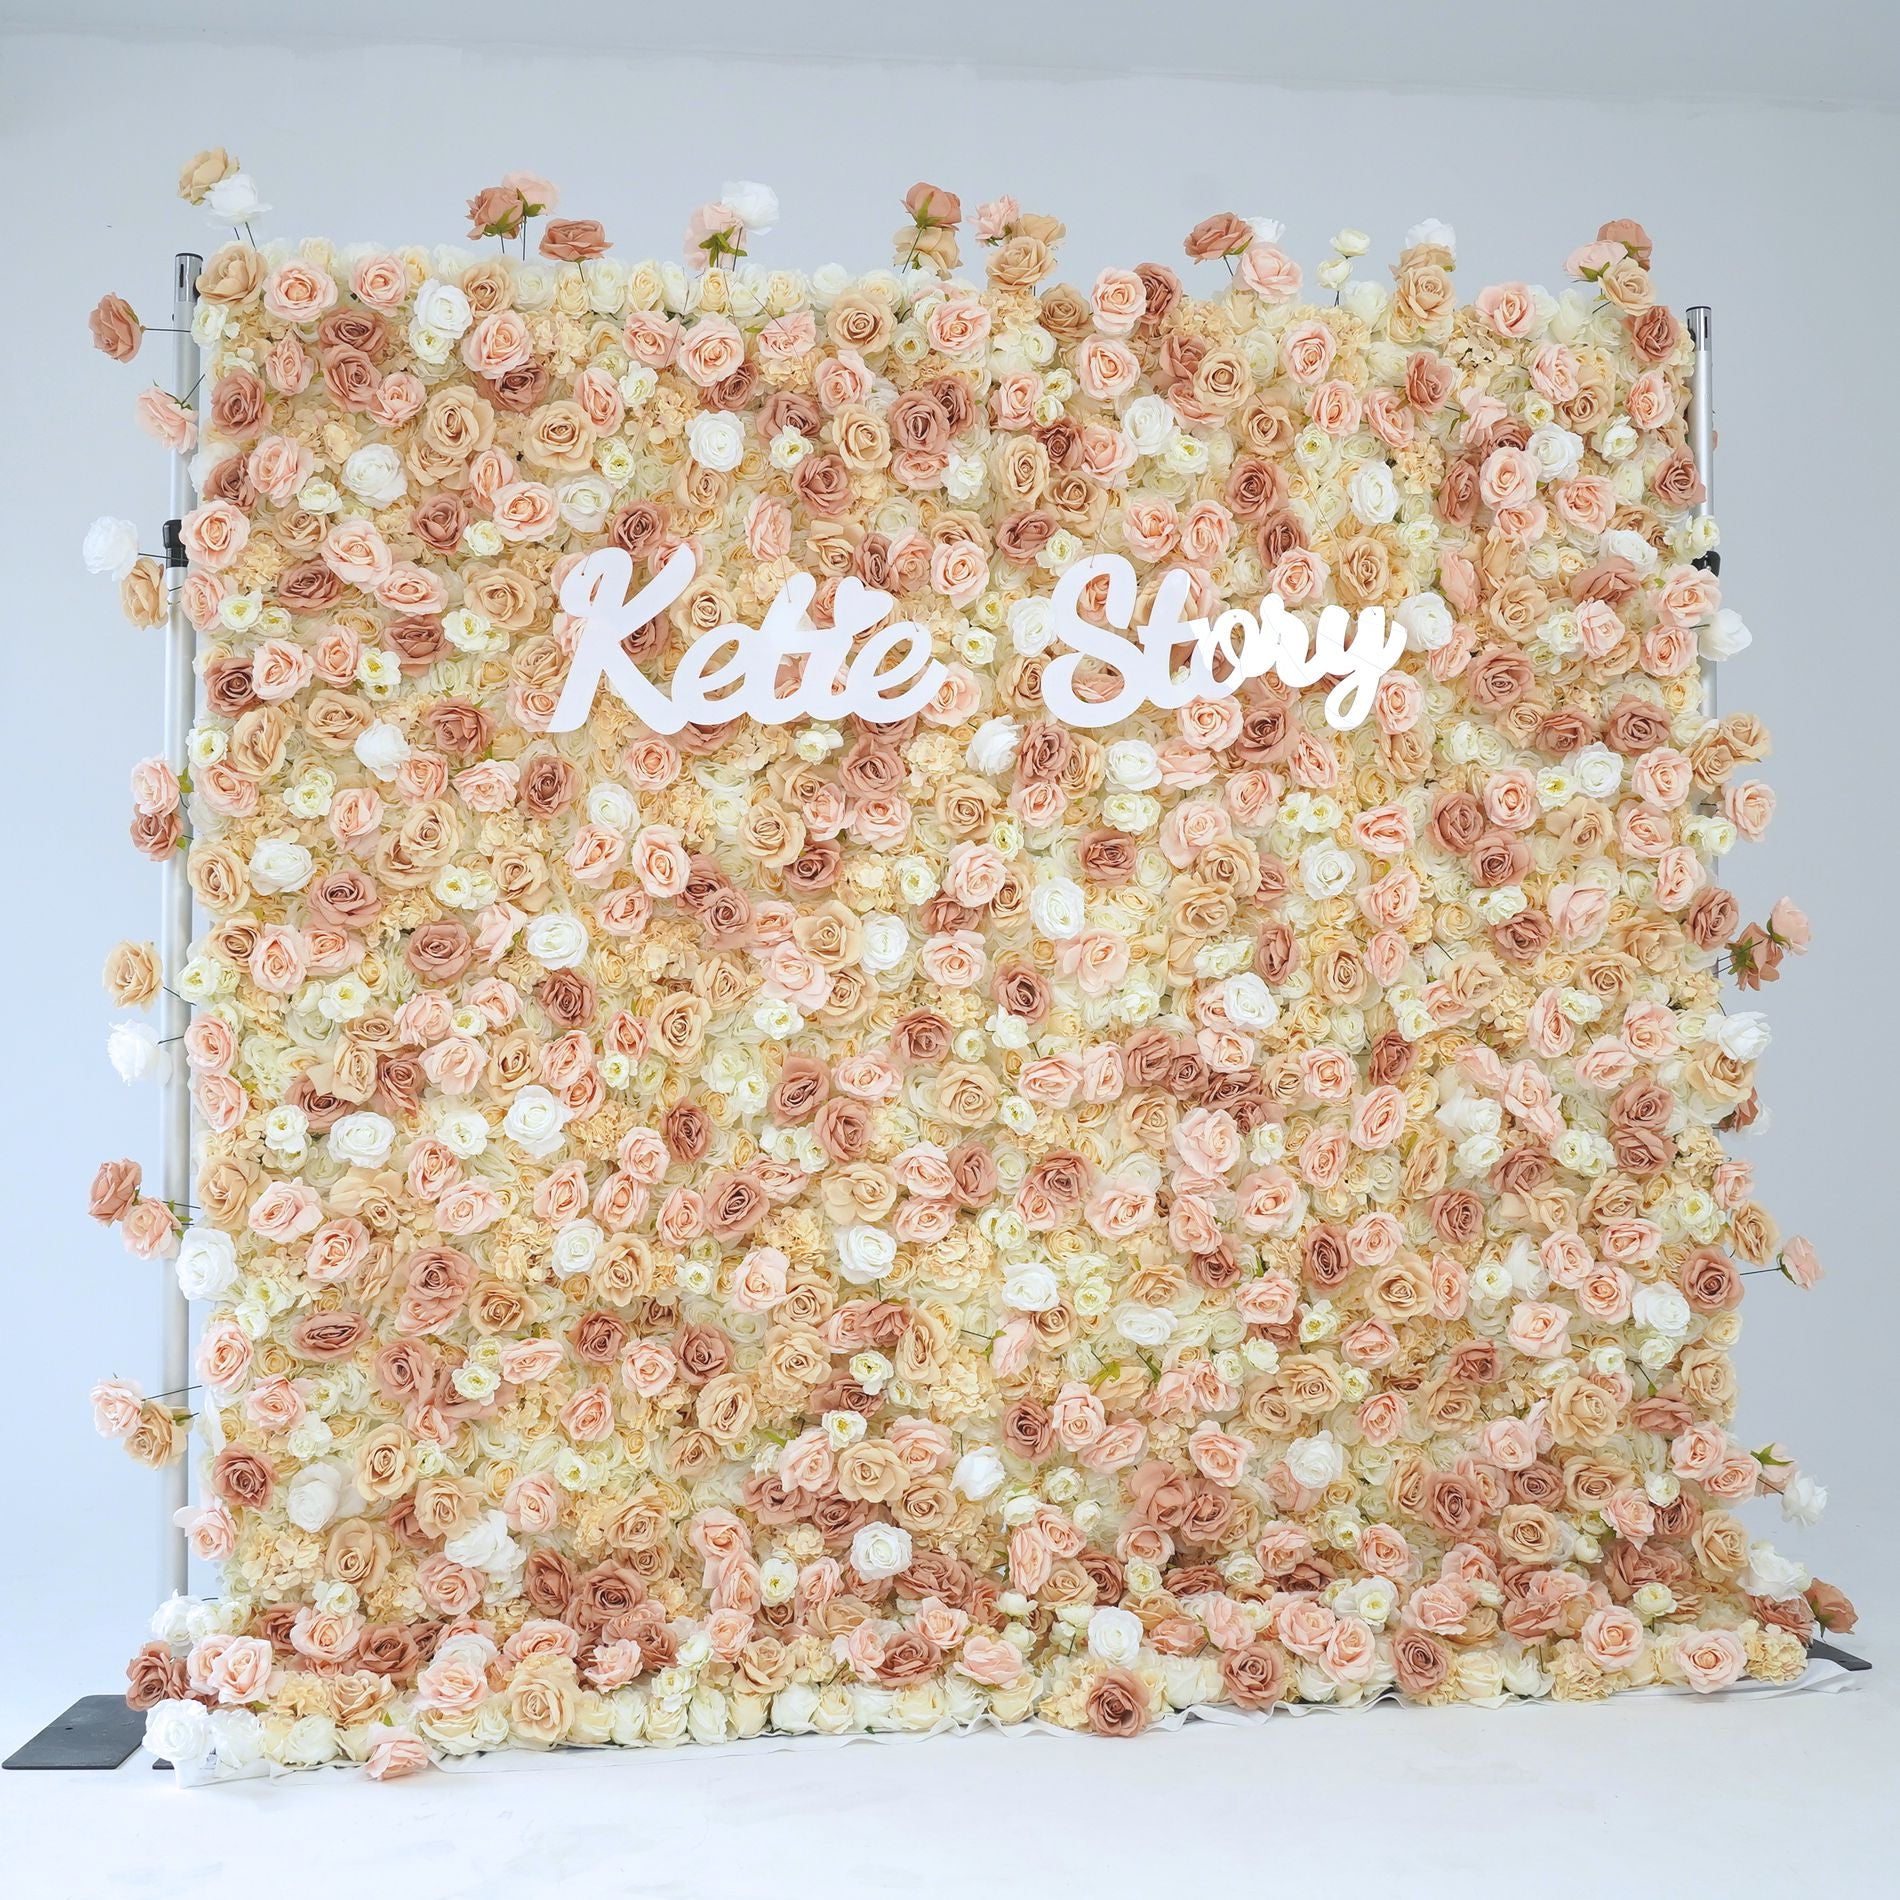 Light pink light coffee roses fabric flower wall looks elegant and noble.